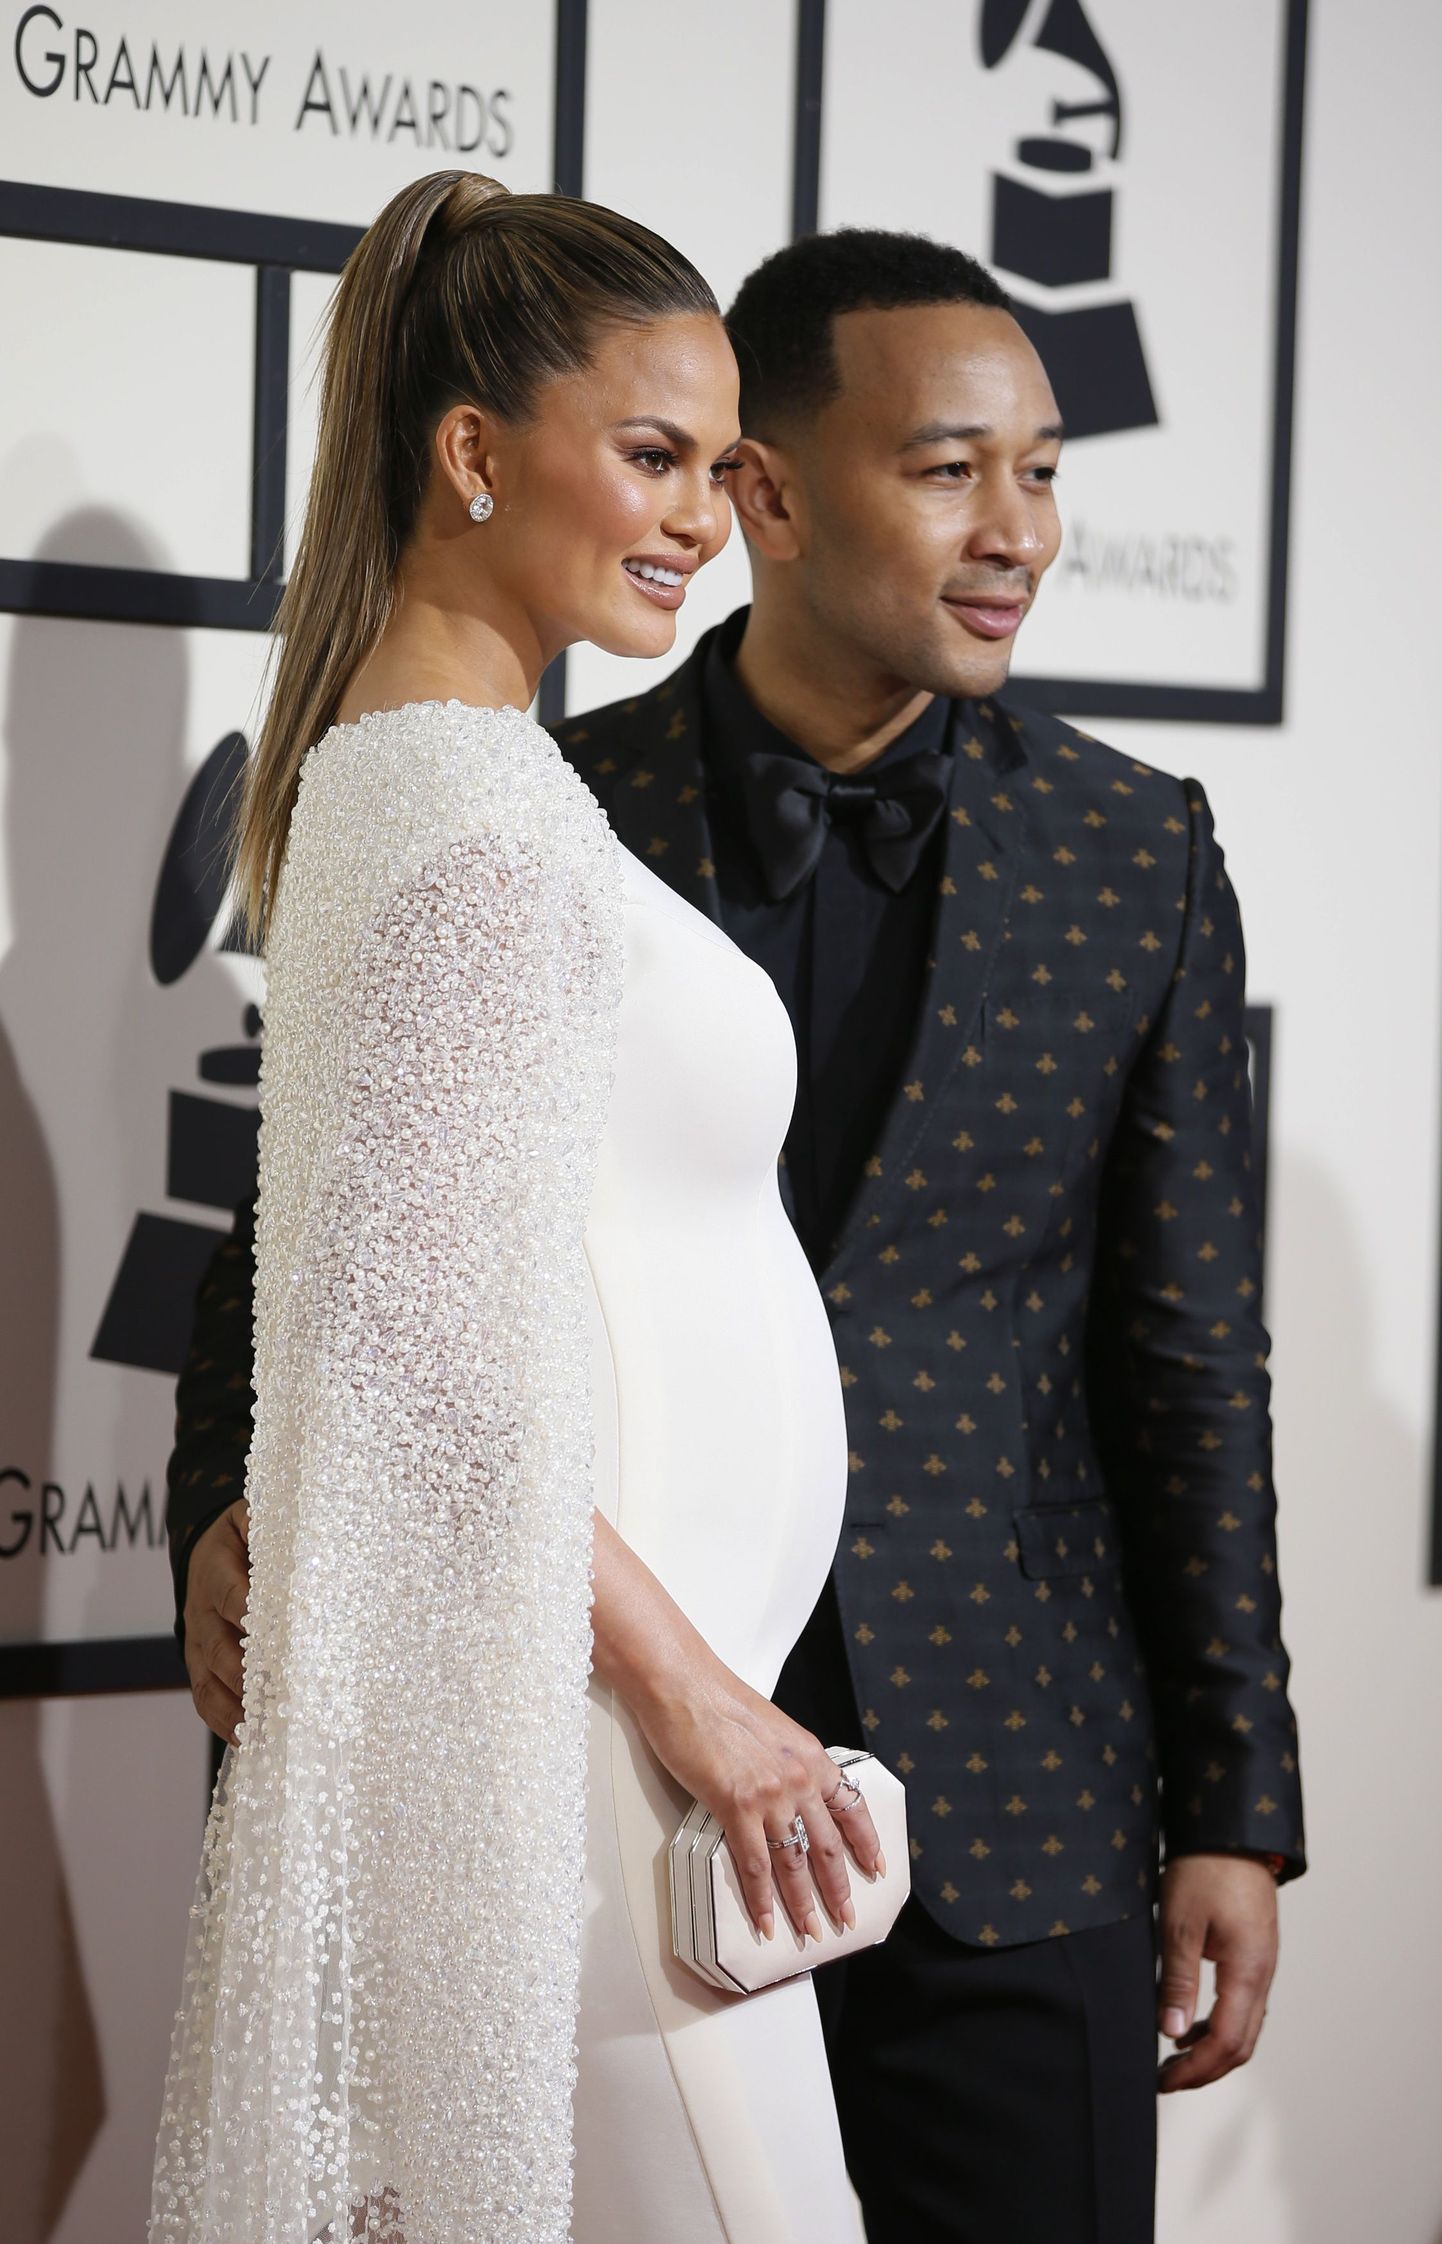 Model Chrissy Teigan and musician John Legend arrive at the 58th Grammy Awards in Los Angeles, California February 15, 2016.  REUTERS/Danny Moloshok